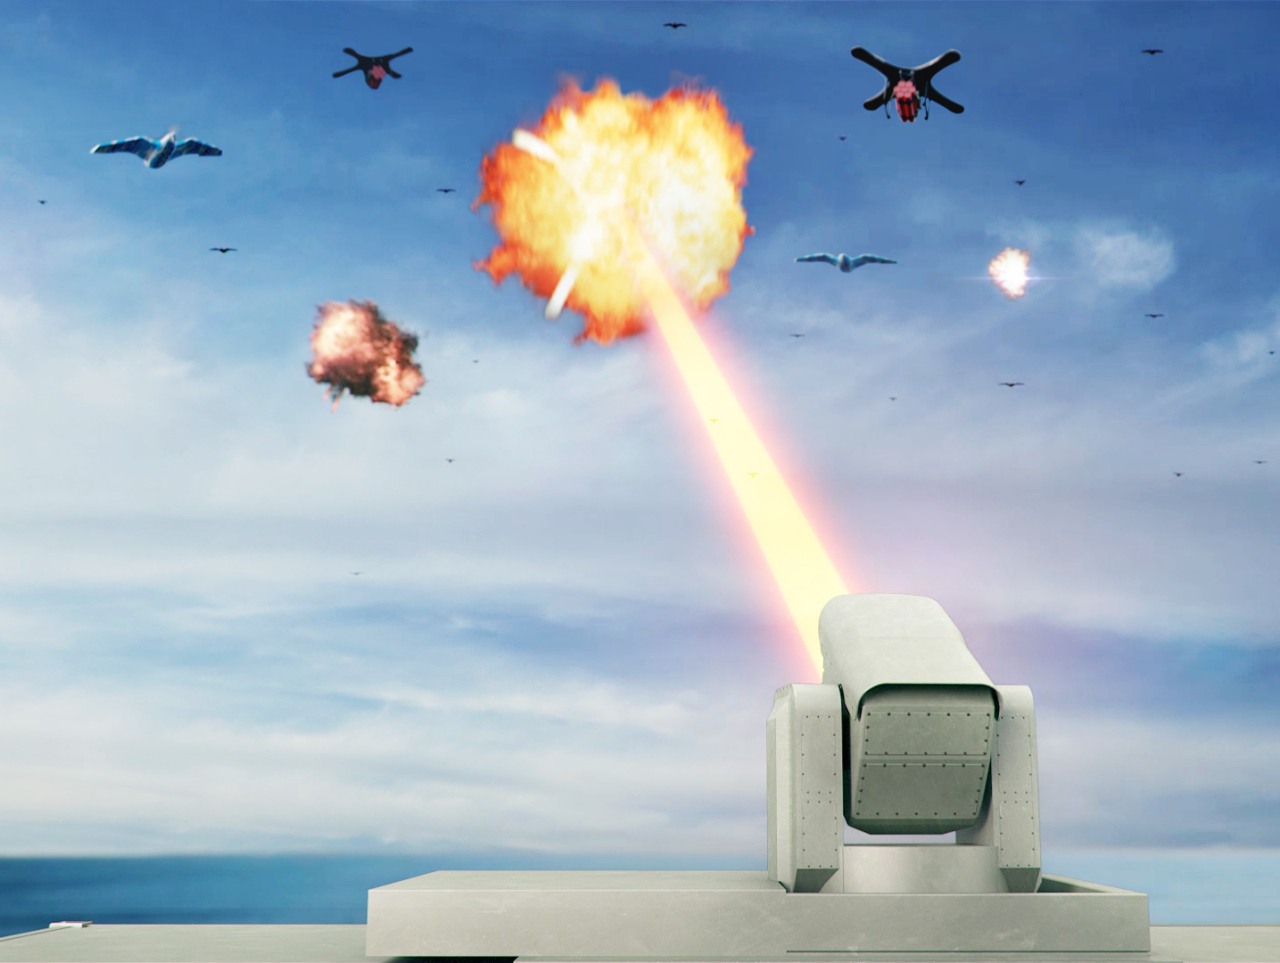 A conceptual image of a laser weapon shooting down drones